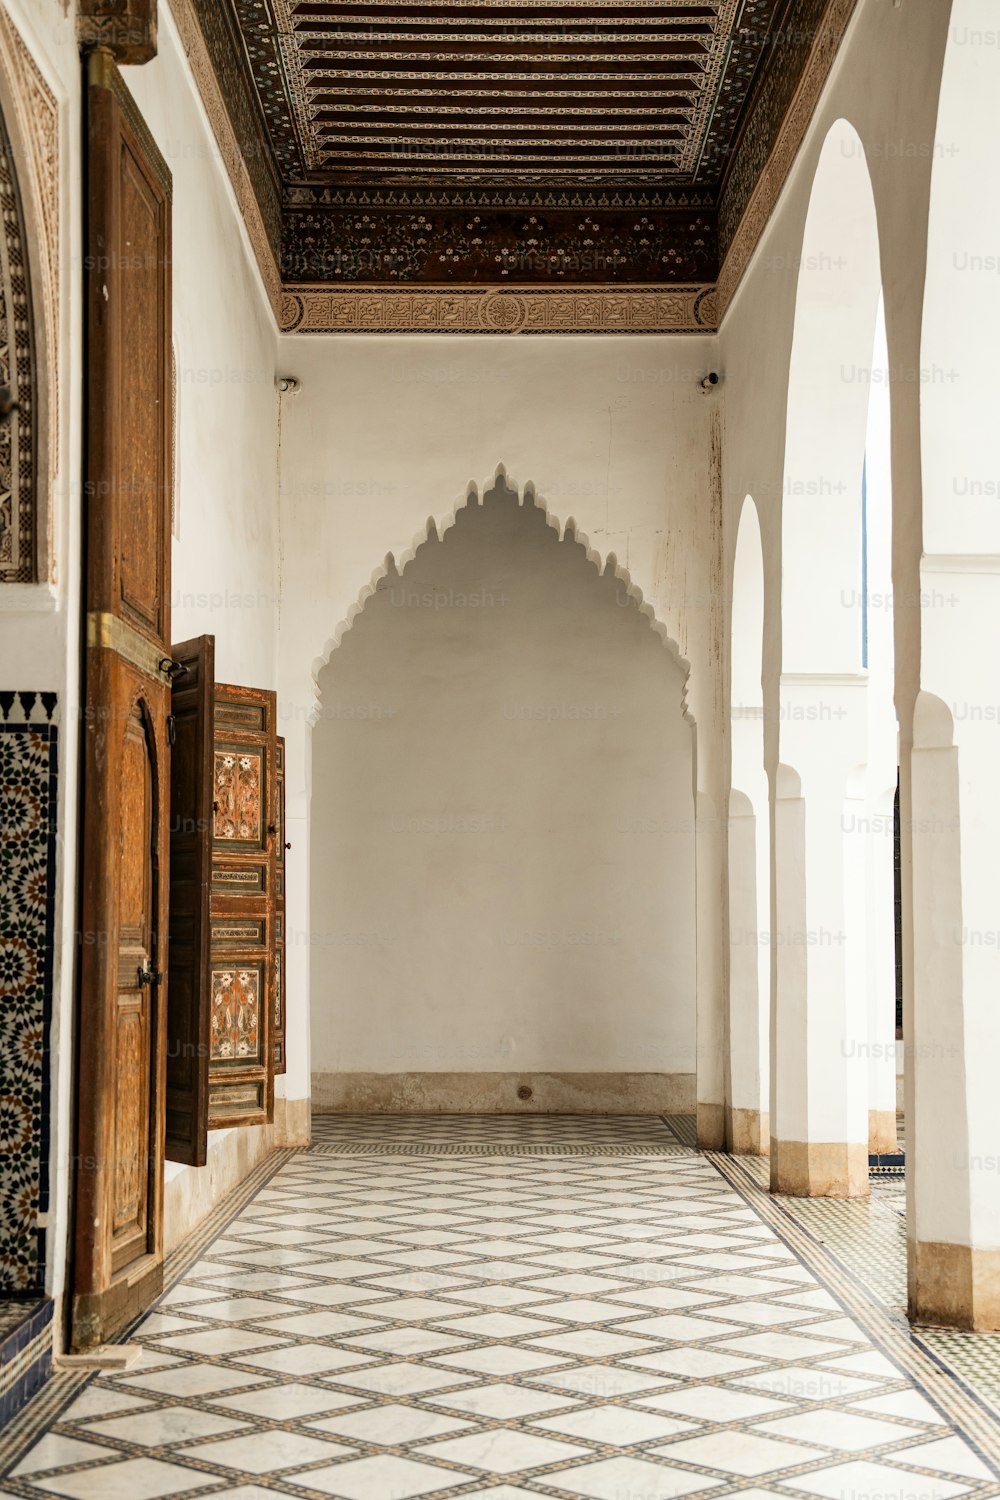 a room with a tiled floor and a wooden door